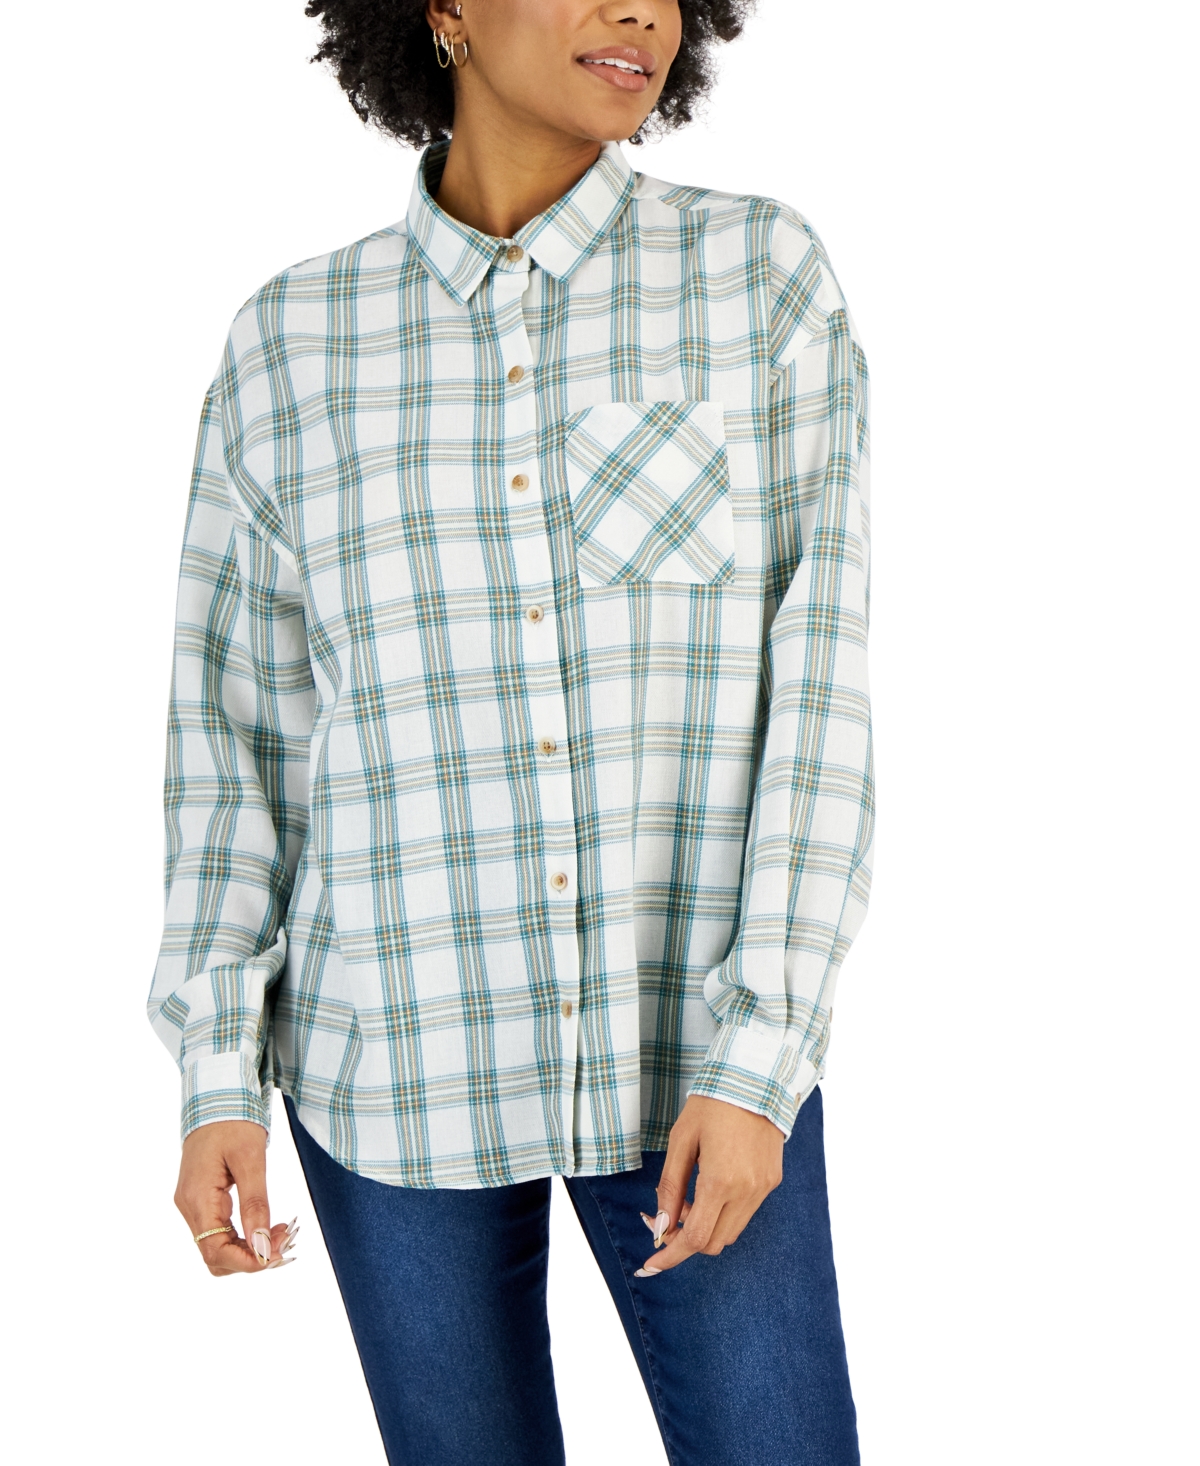 Just Polly Juniors' Plaid-Print Button-Front Long-Sleeve Shirt